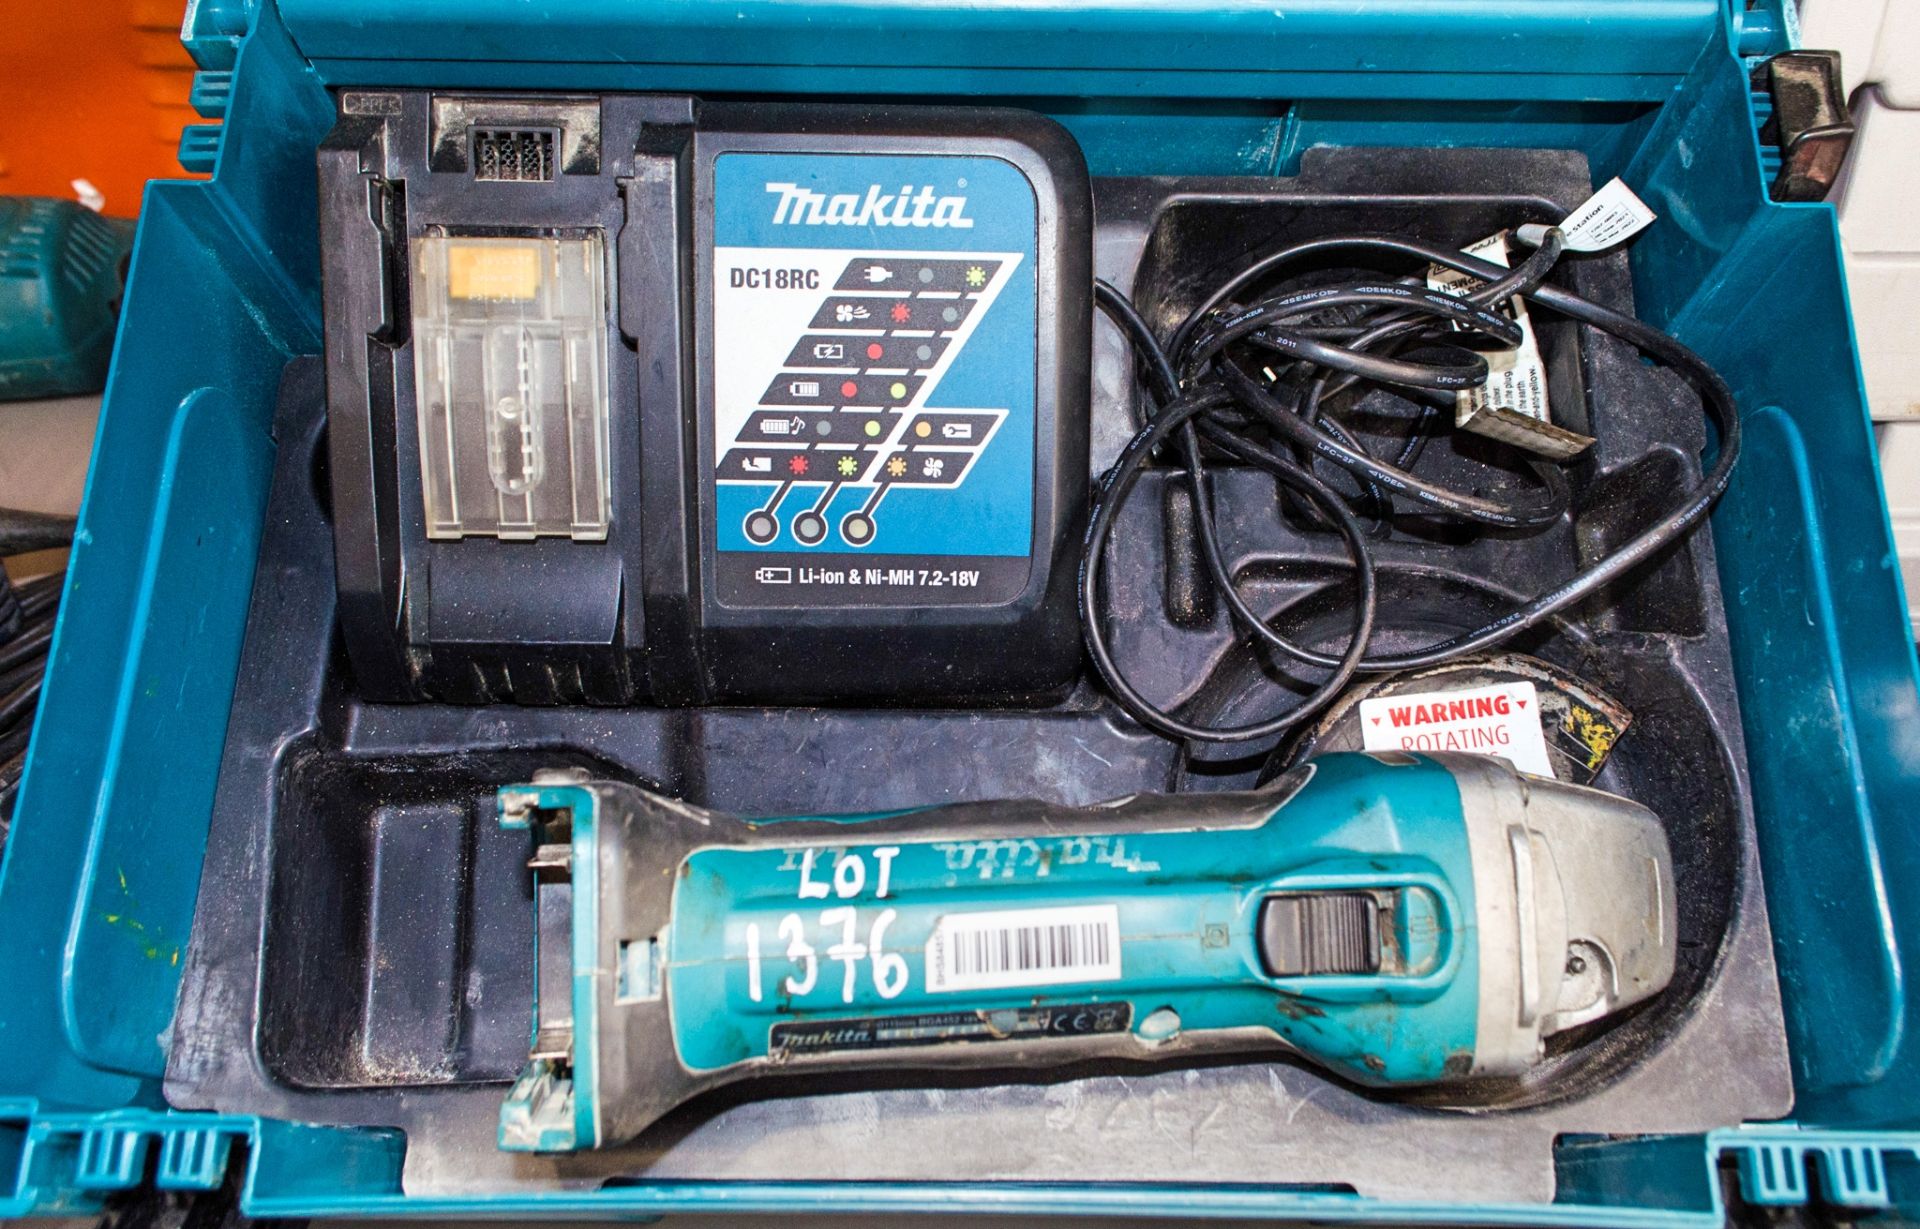 Makita BGA452 cordless angle grinder c/w charger and carry case ** No battery ** 1267-0893